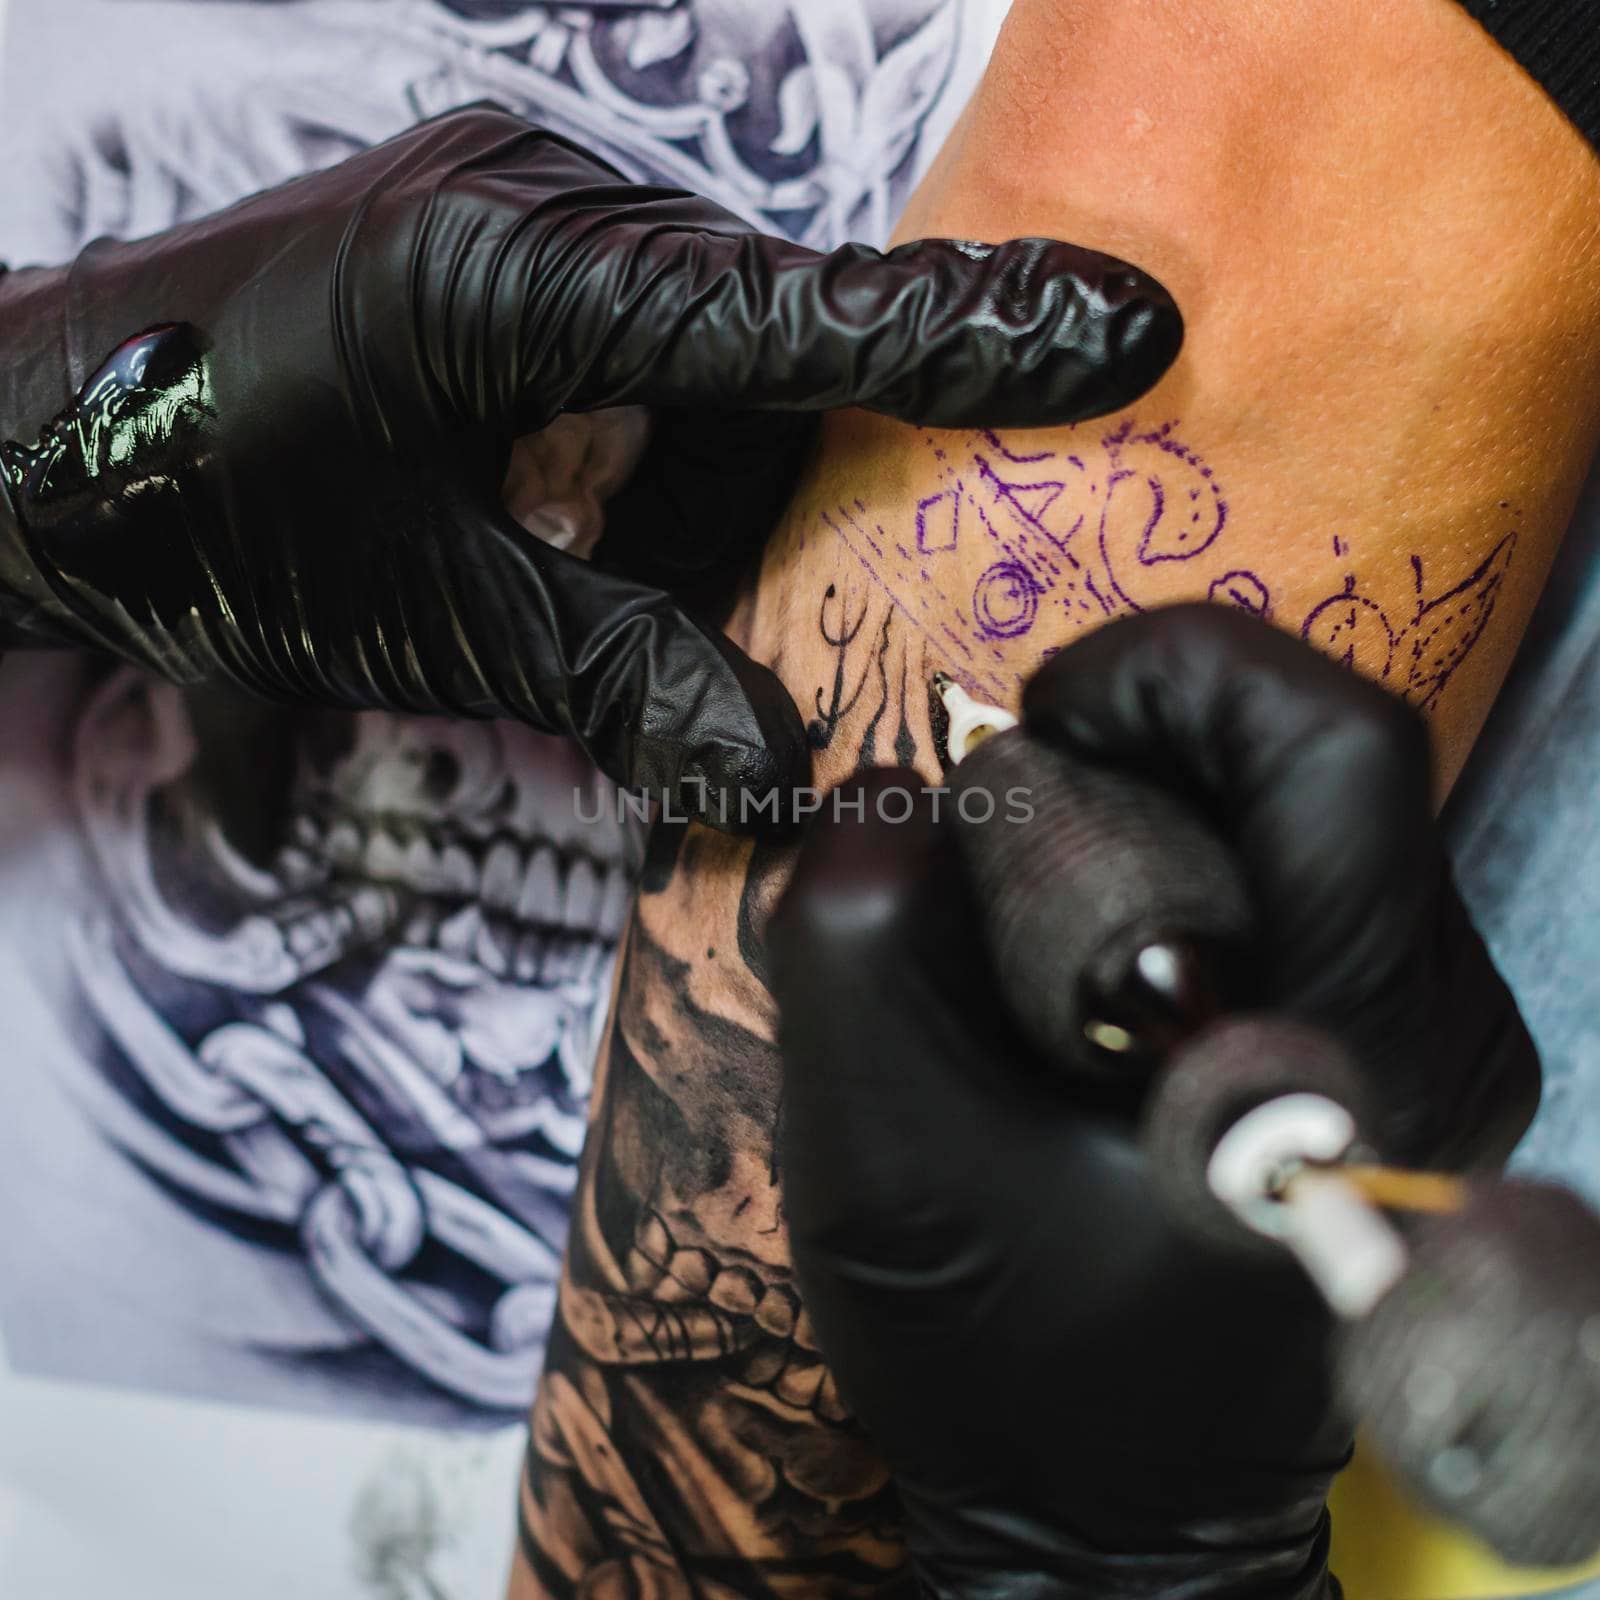 hands gloves doing tattoo. High quality photo by Zahard